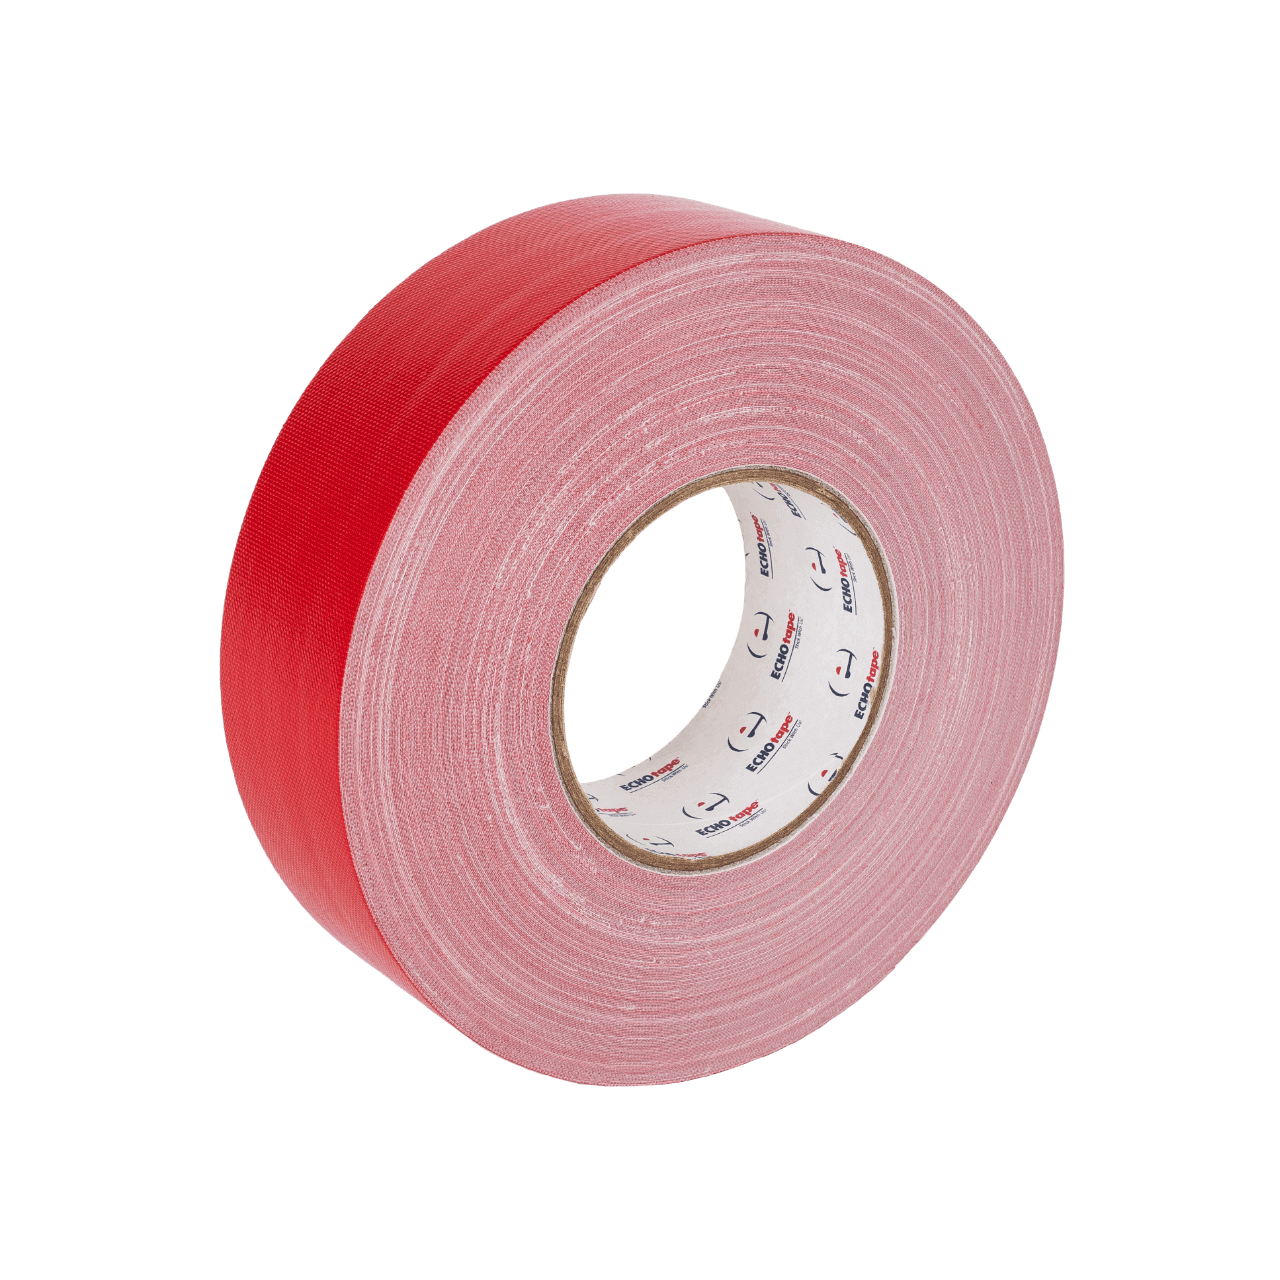 Stucco Tape, Red Stucco Duct Tape, 60-Day Tape